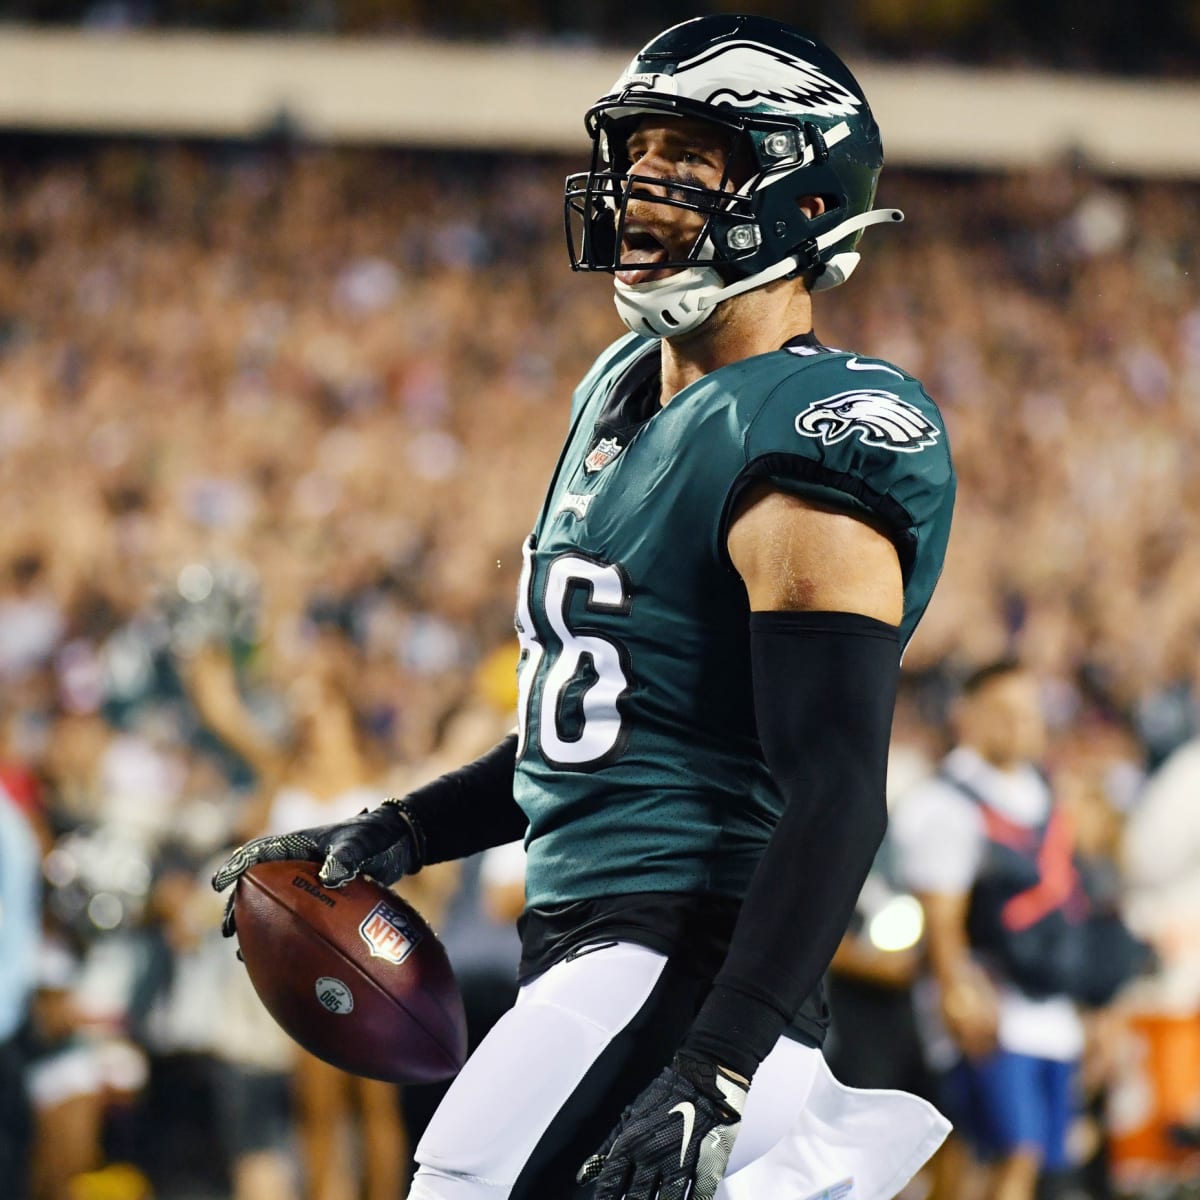 Cardinals acquire tight end Zach Ertz in trade with Eagles